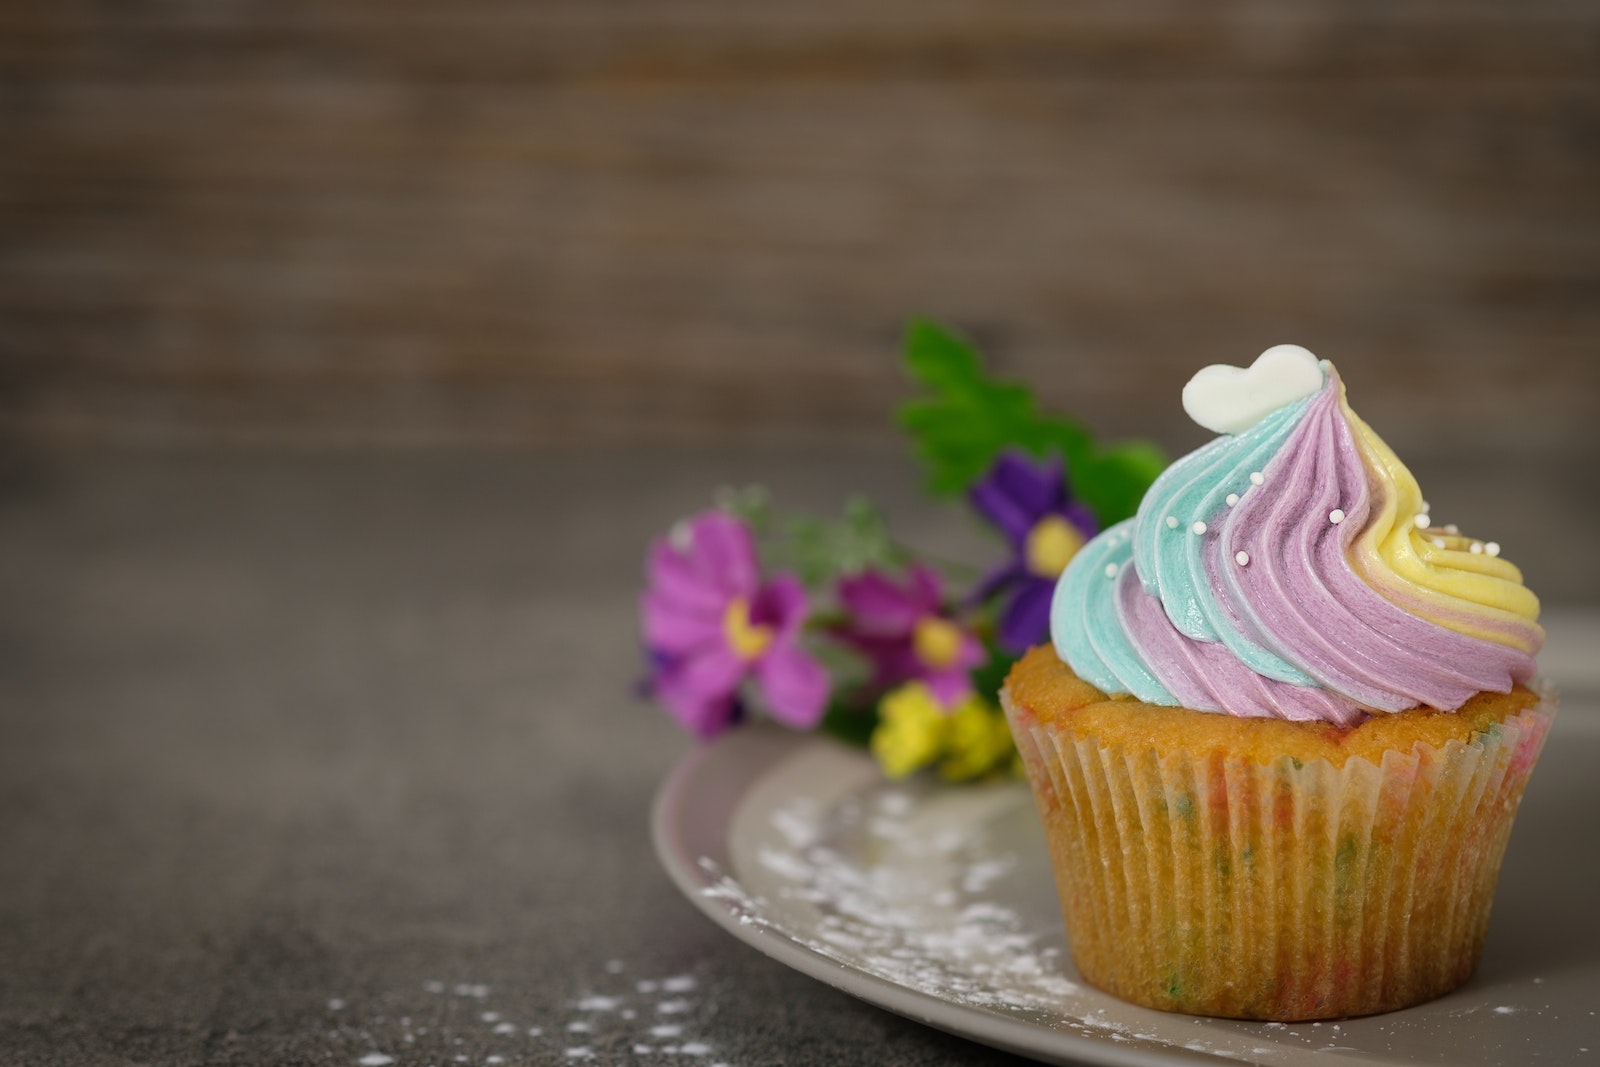 Close Up Photography of Cupcake on Gray Ceramic Plate